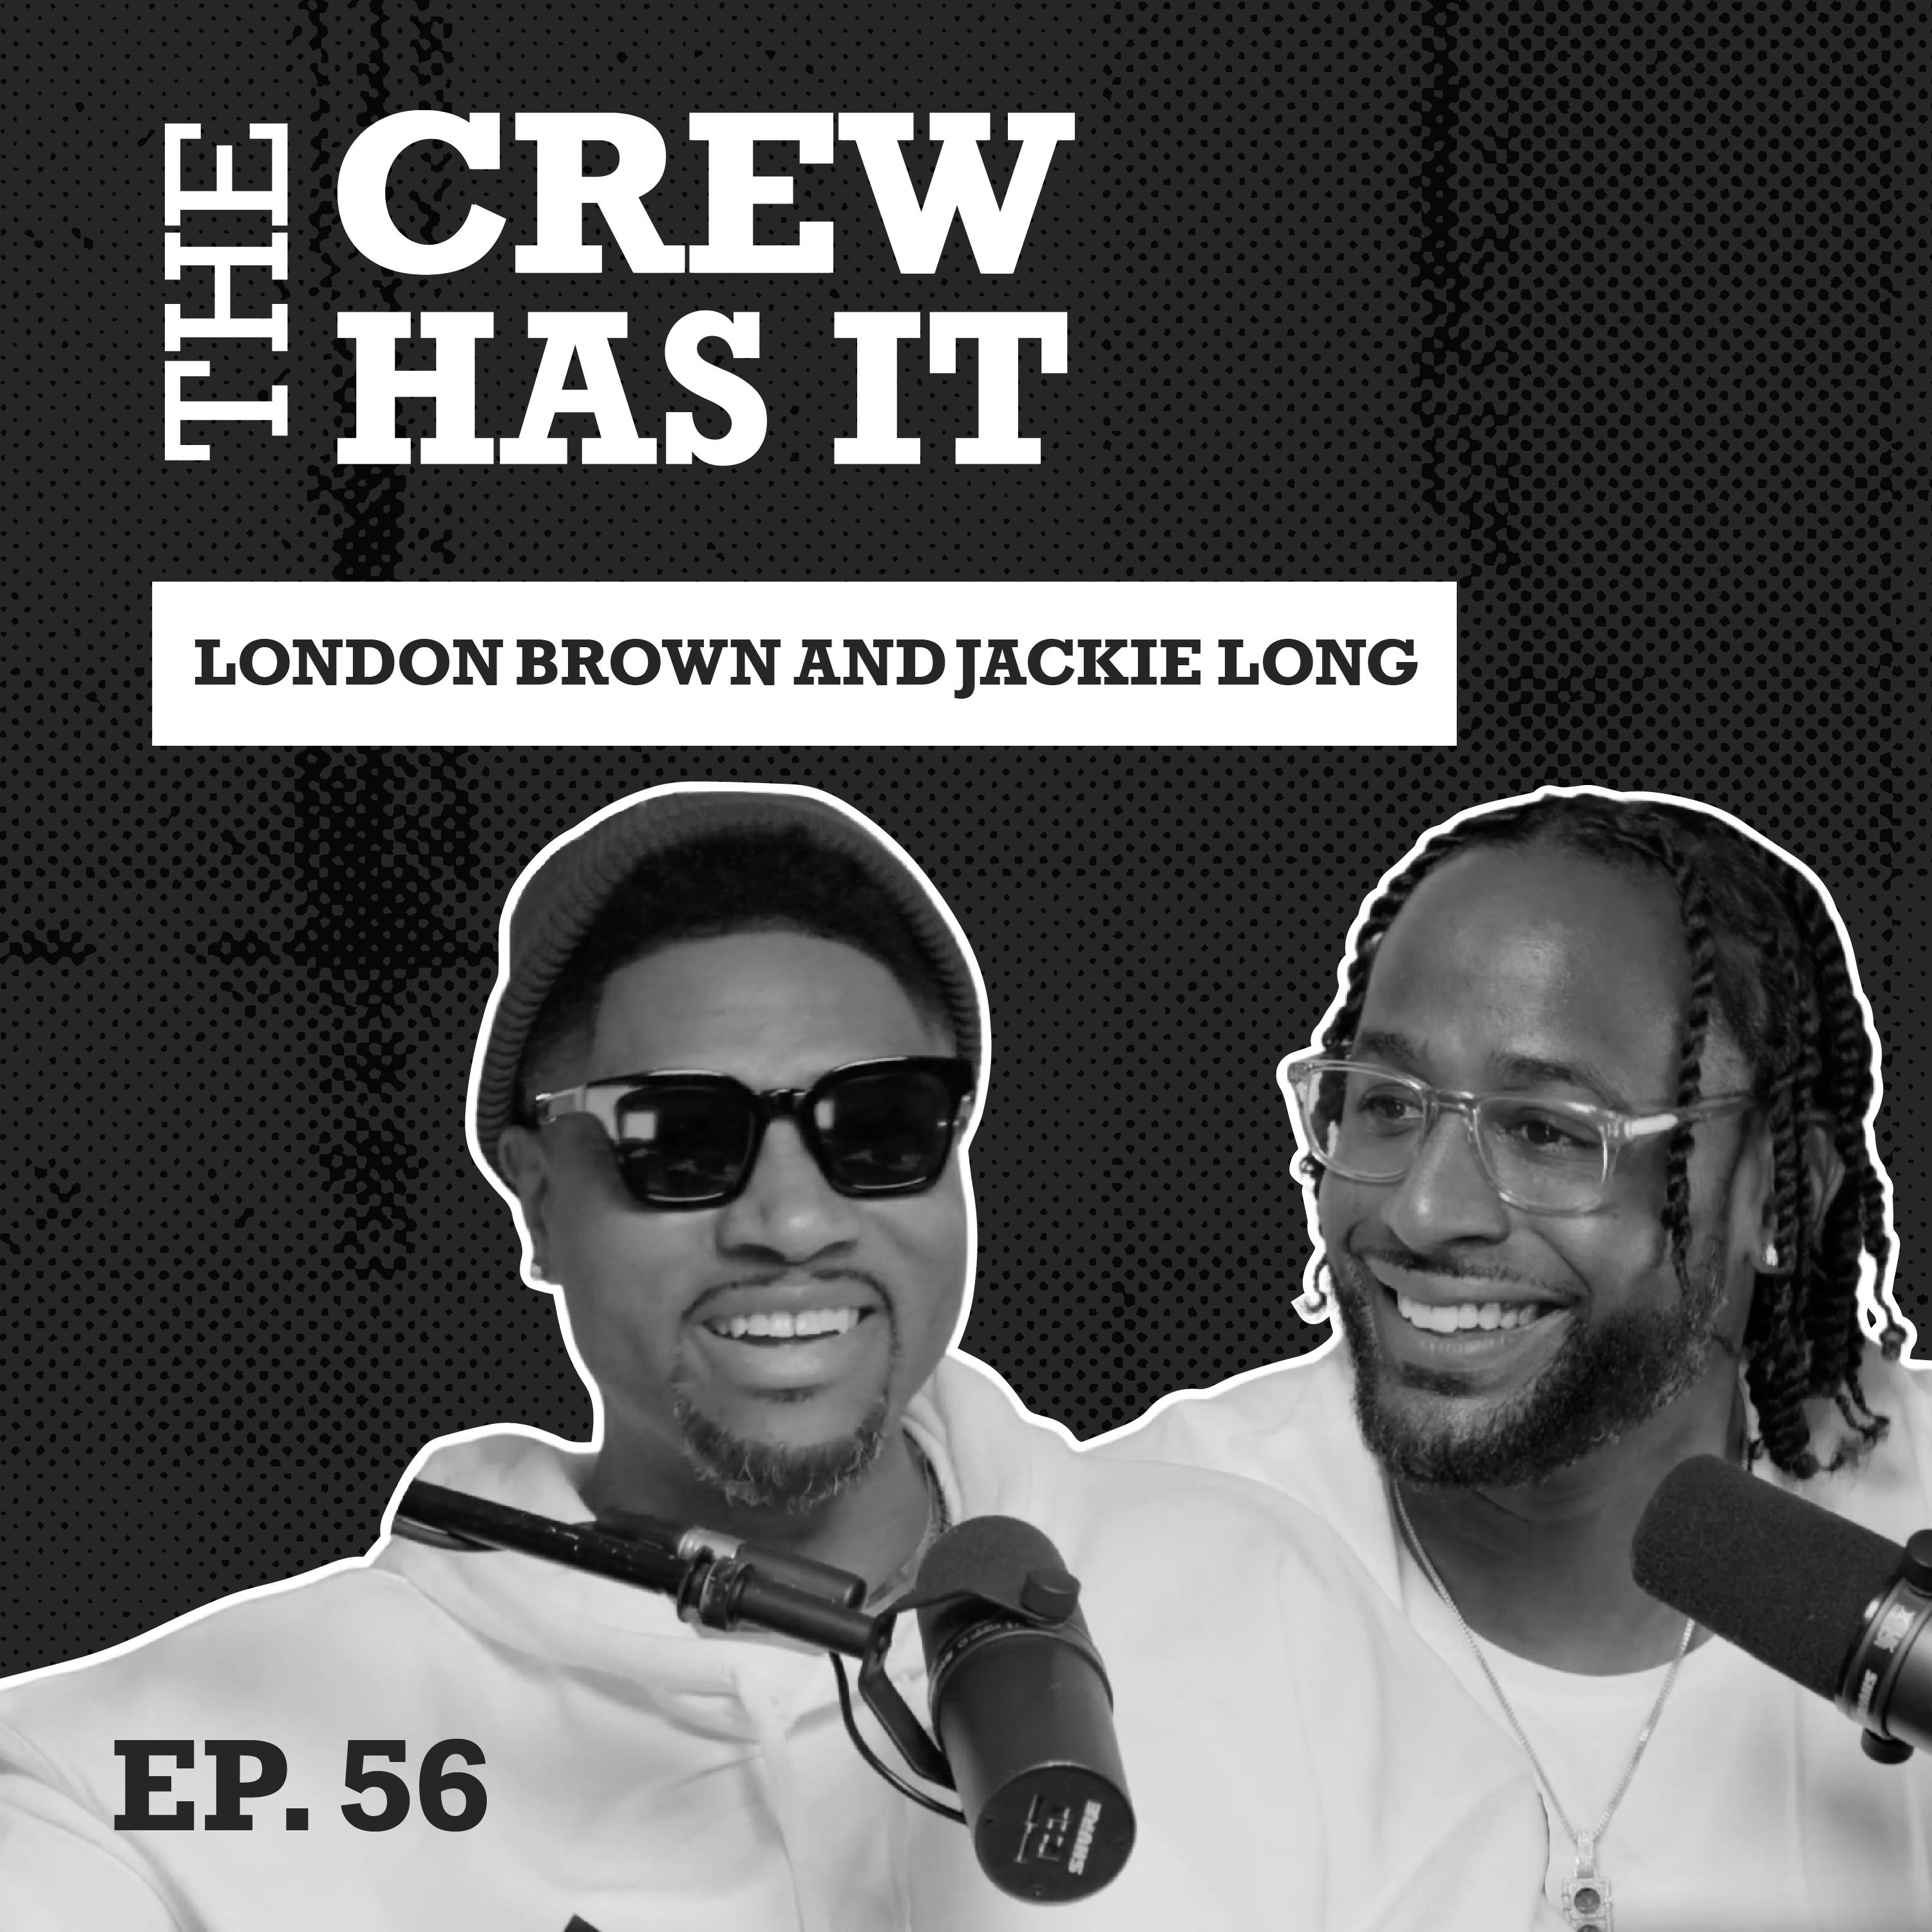 Power Universe Avengers, Jackie Long and London Brown give out free game | Ep 56 | The Crew Has It